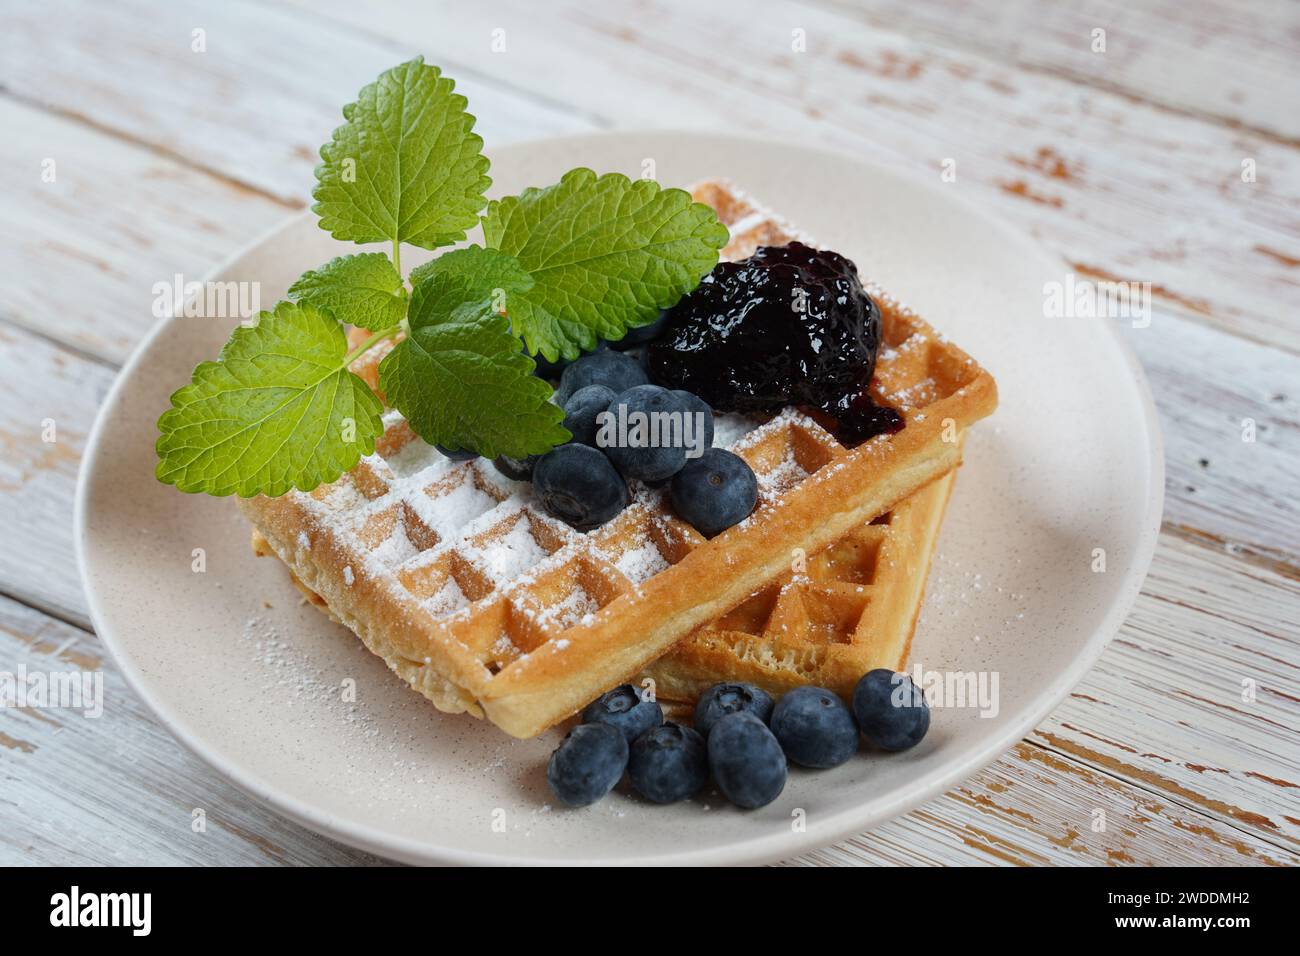 Delicious waffles with blueberry jam and fresh berries on wooden table Stock Photo